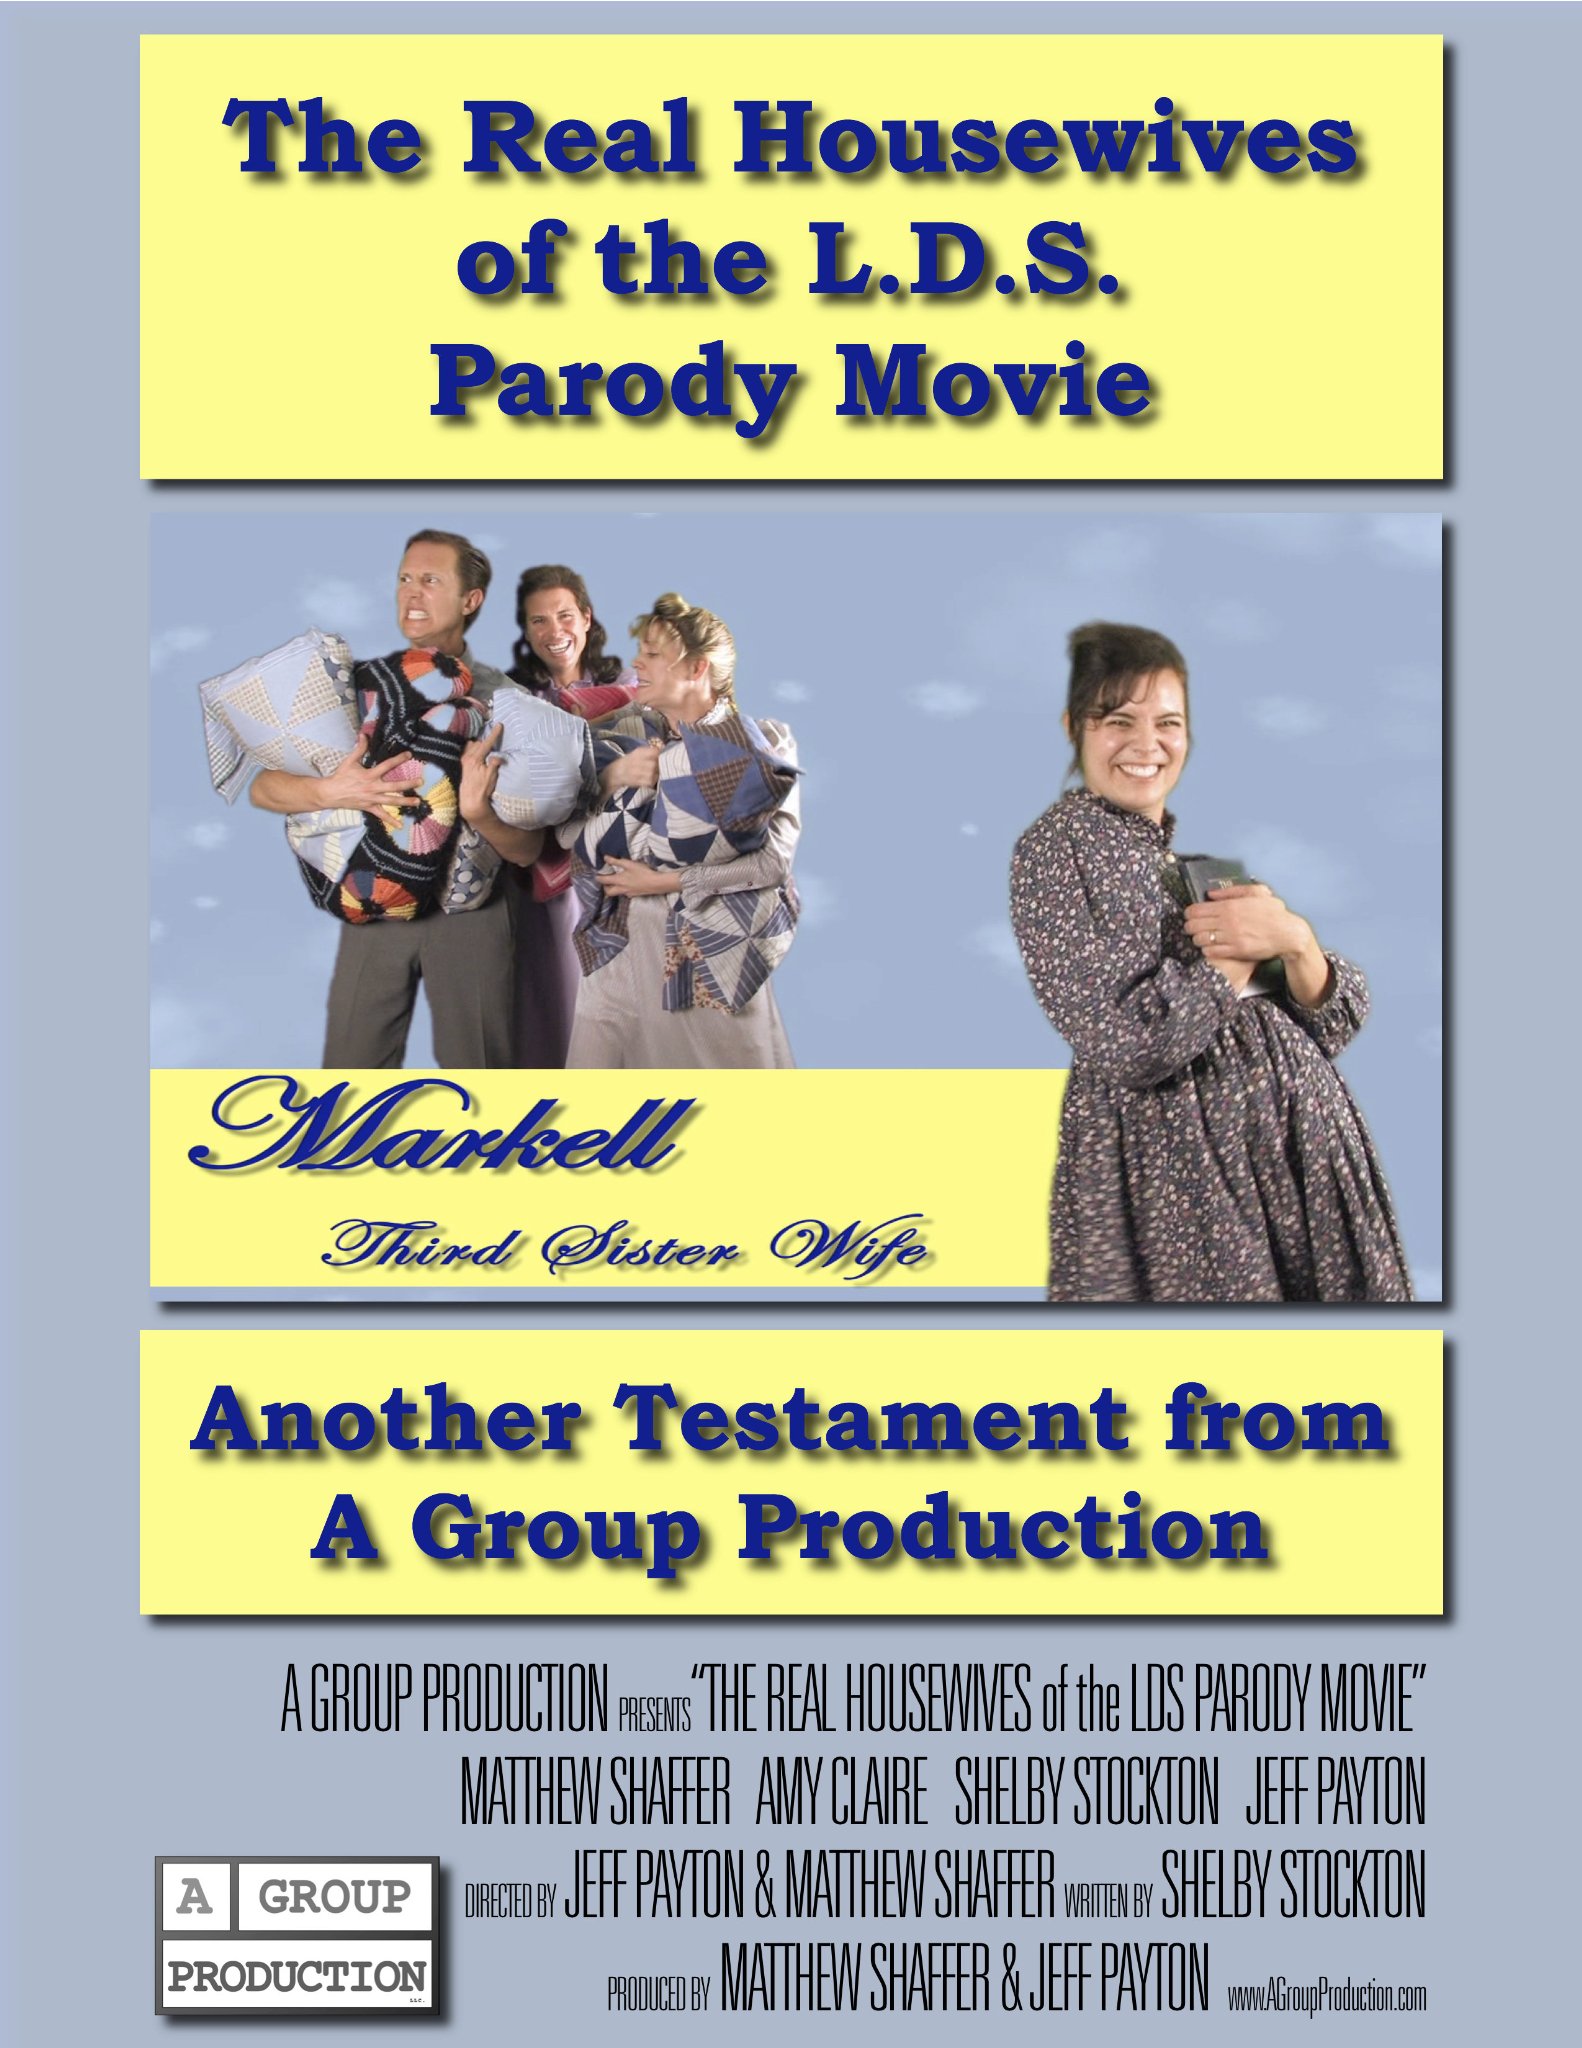 Фото - The Real Housewives of the LDS Parody Movie: 1582x2048 / 390 Кб